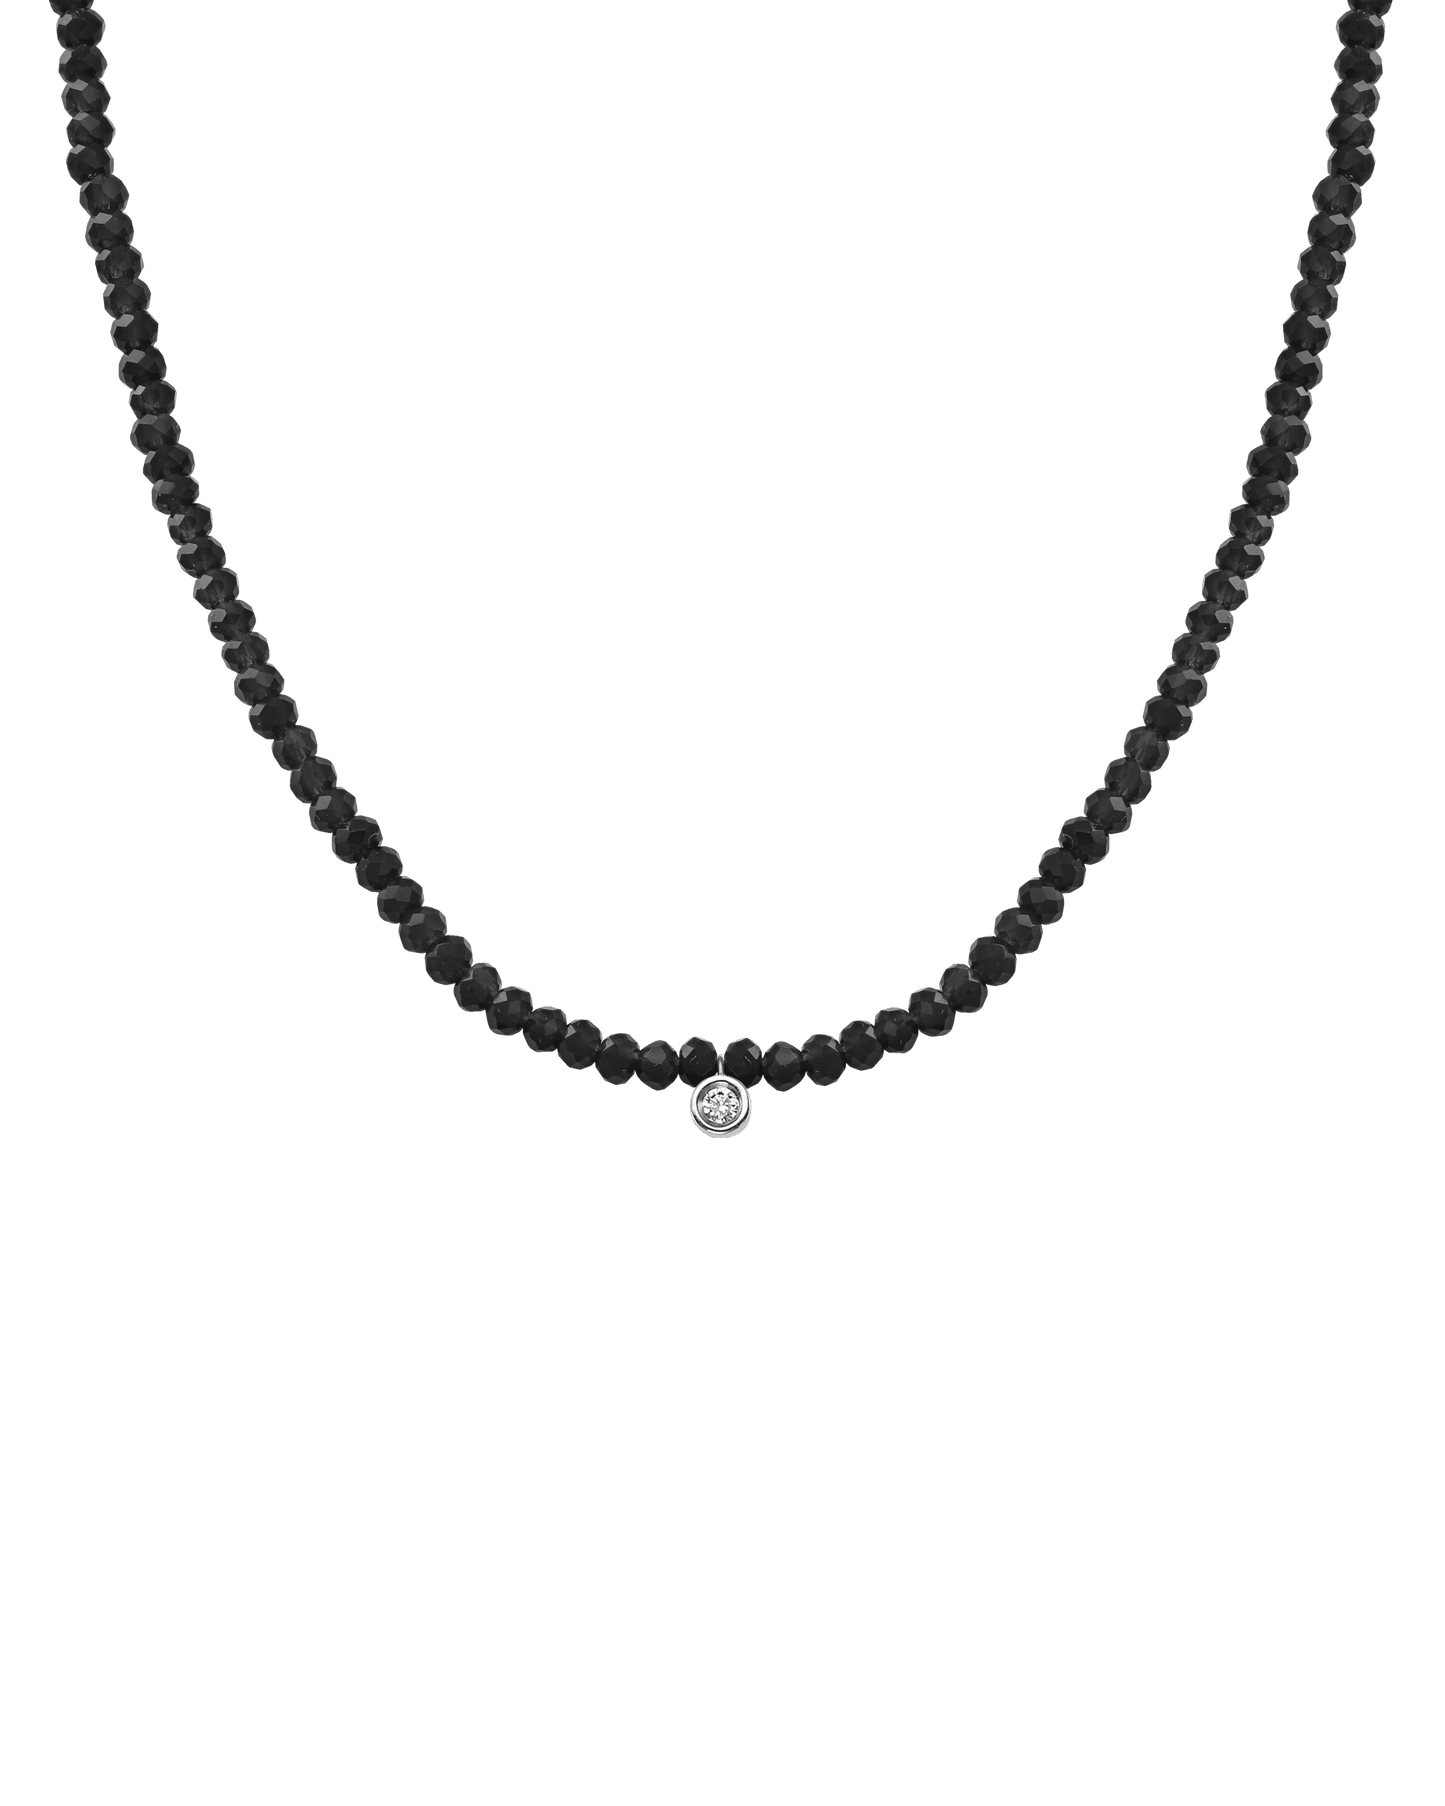 The Gemstone & Diamond Necklace - 14K White Gold Necklaces 14K Solid Gold Glass Beads Black Spinnel Small: 0.03ct 14"